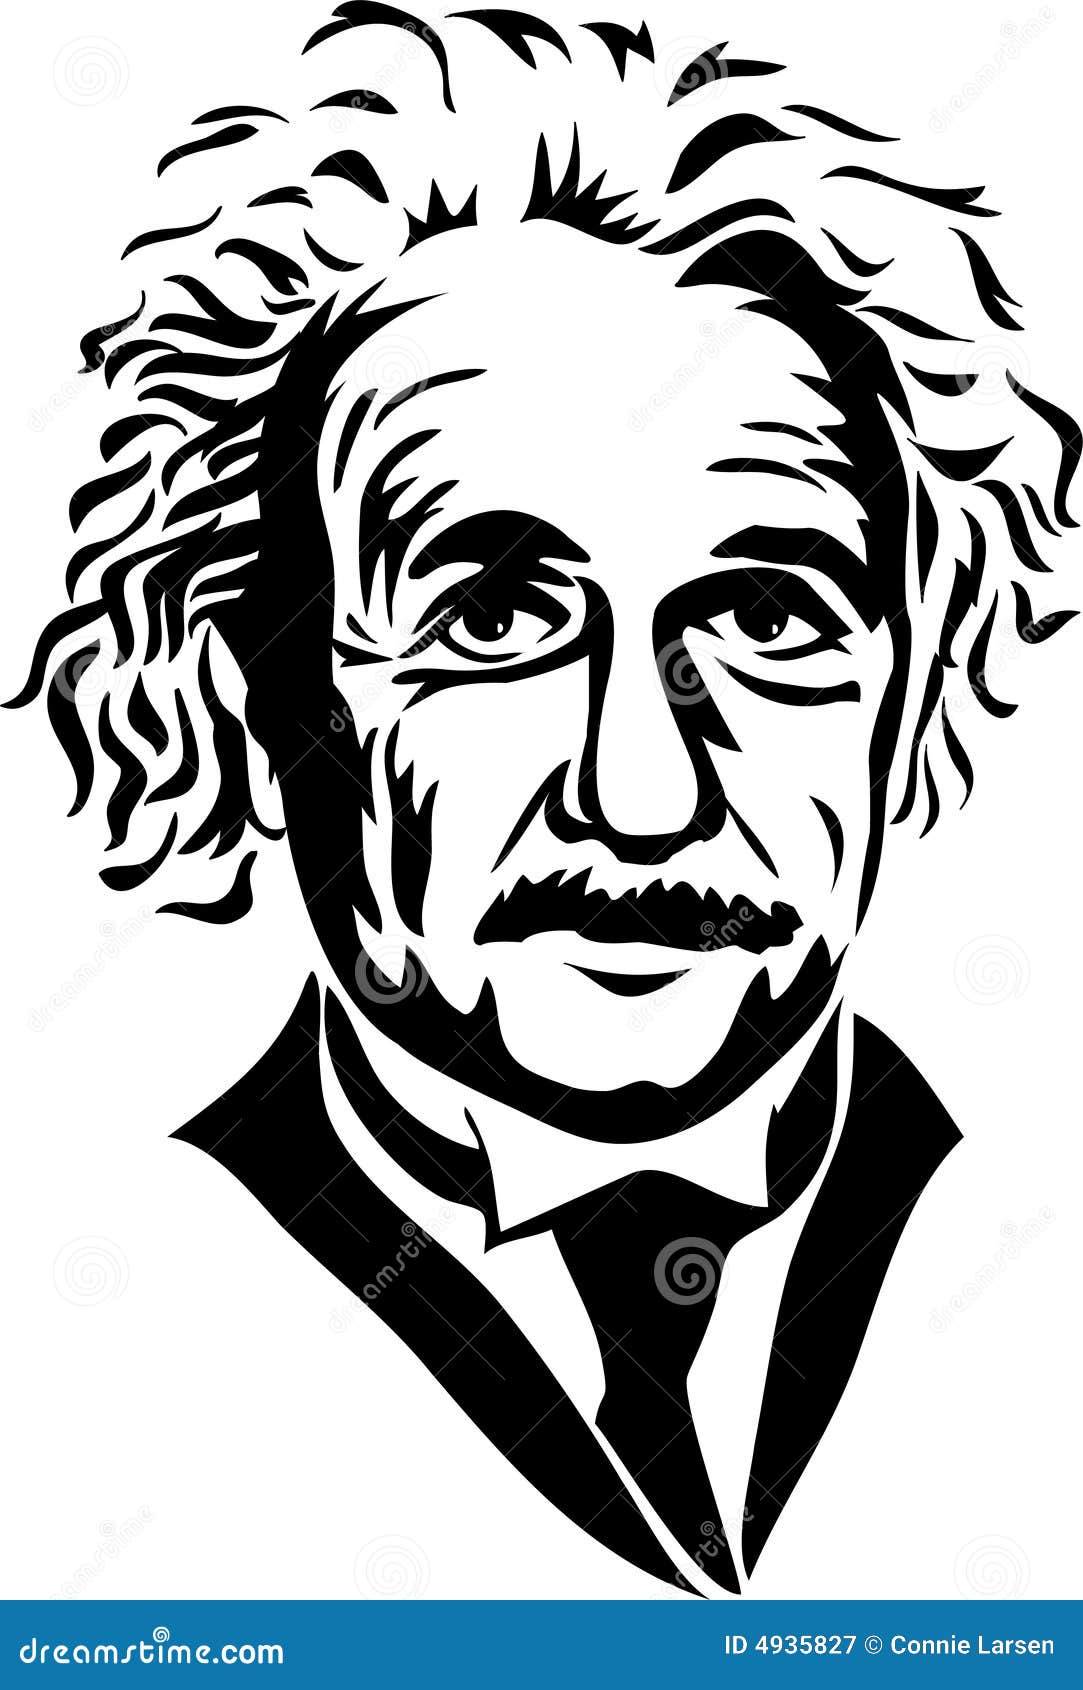 How To Draw Albert Einstein, Step by Step, Drawing Guide, by Dawn - DragoArt